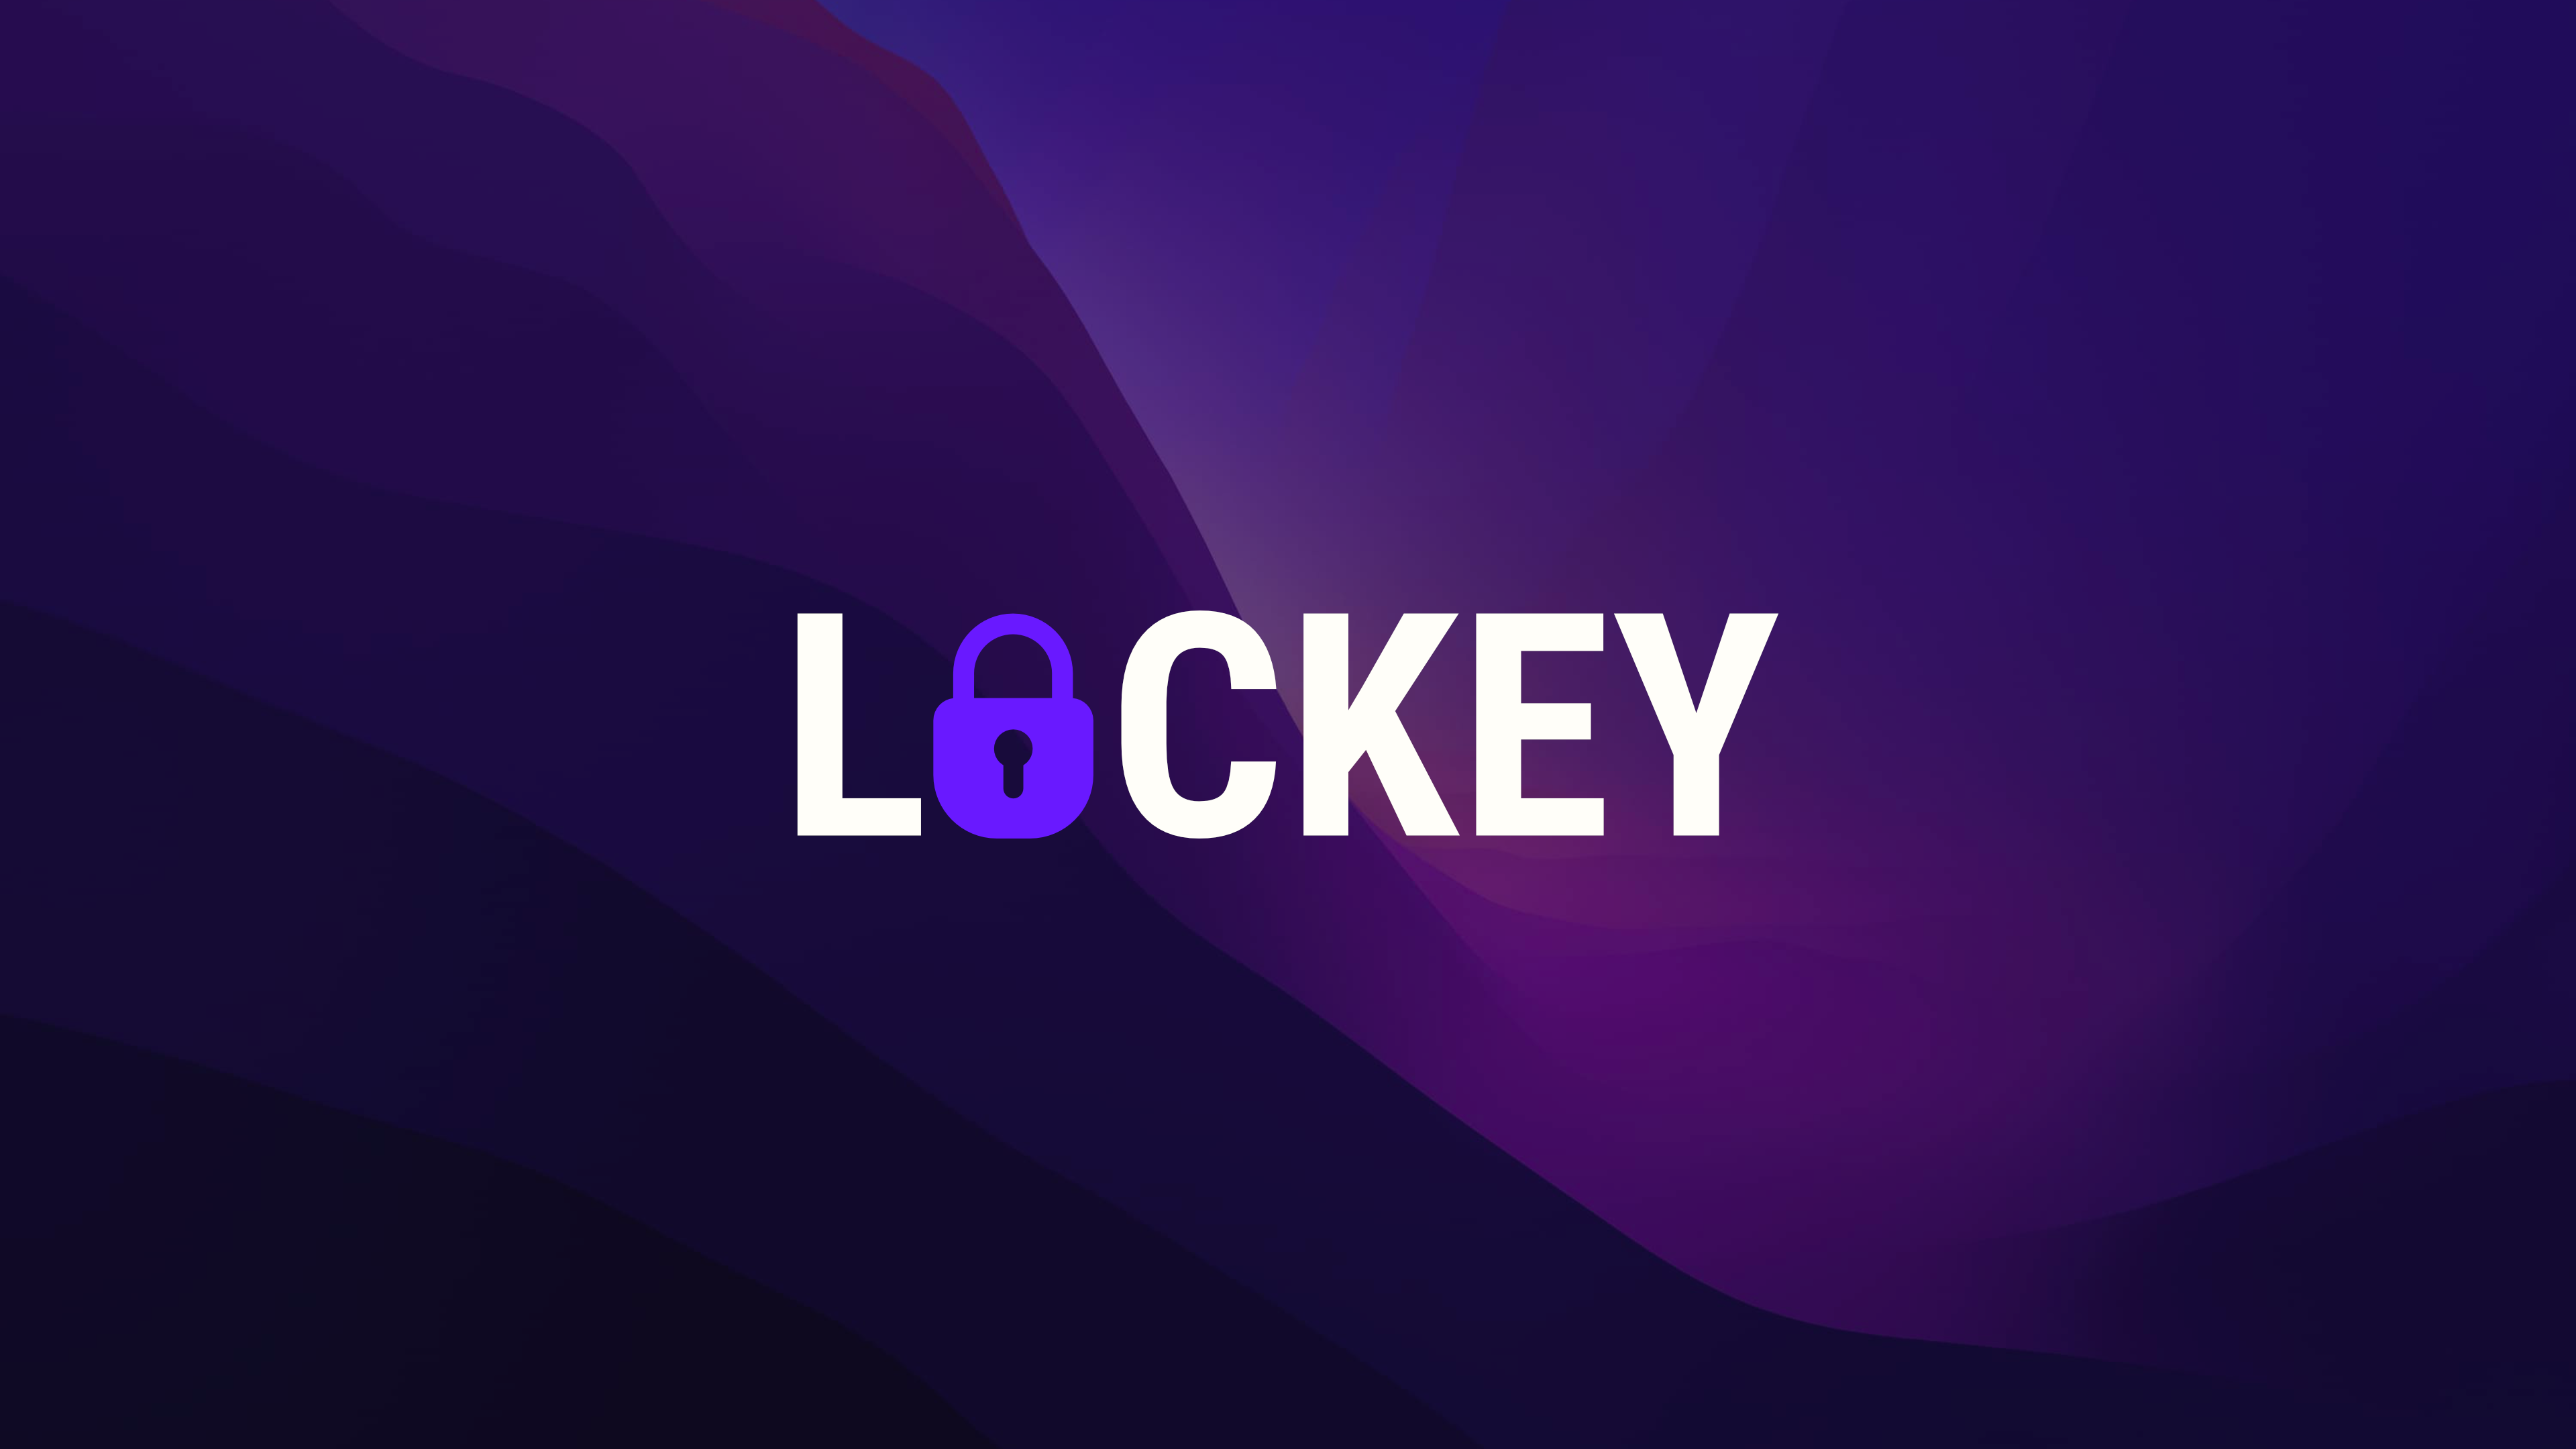 LOCKEY logo wallpaper with mountain-like waves in the background